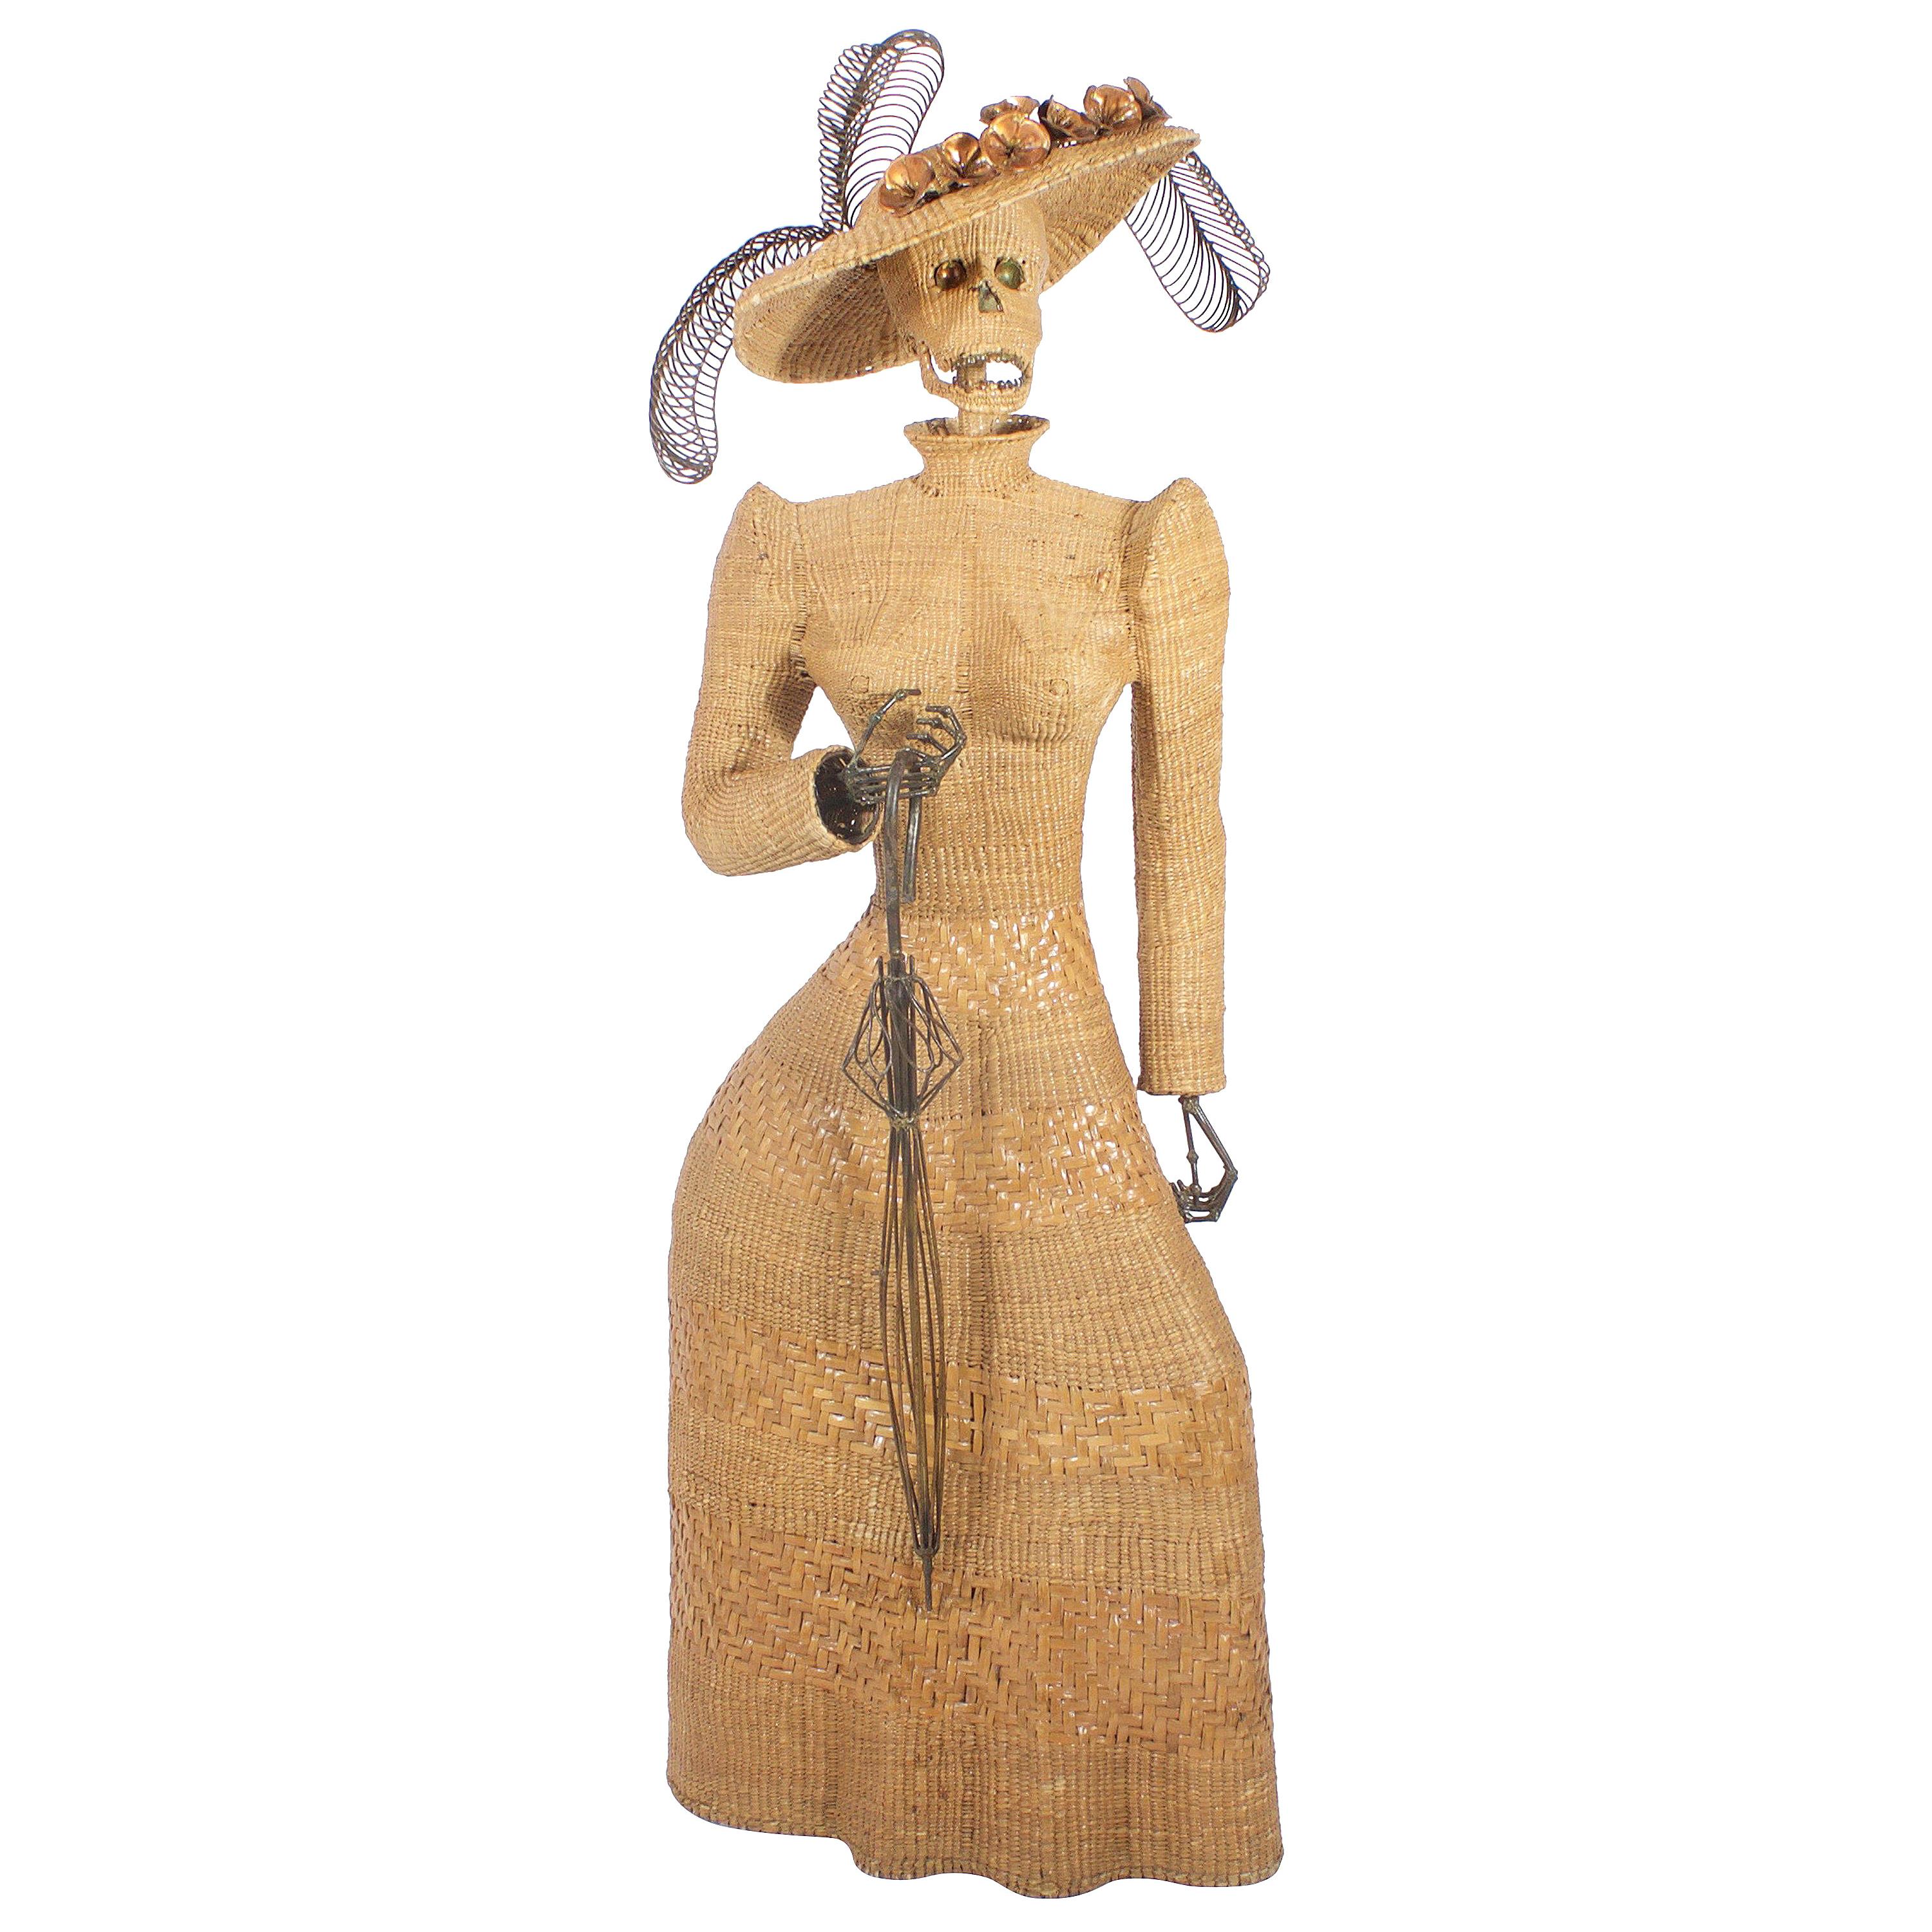 Mario Torres Wicker Sculpture of a Woman For Sale